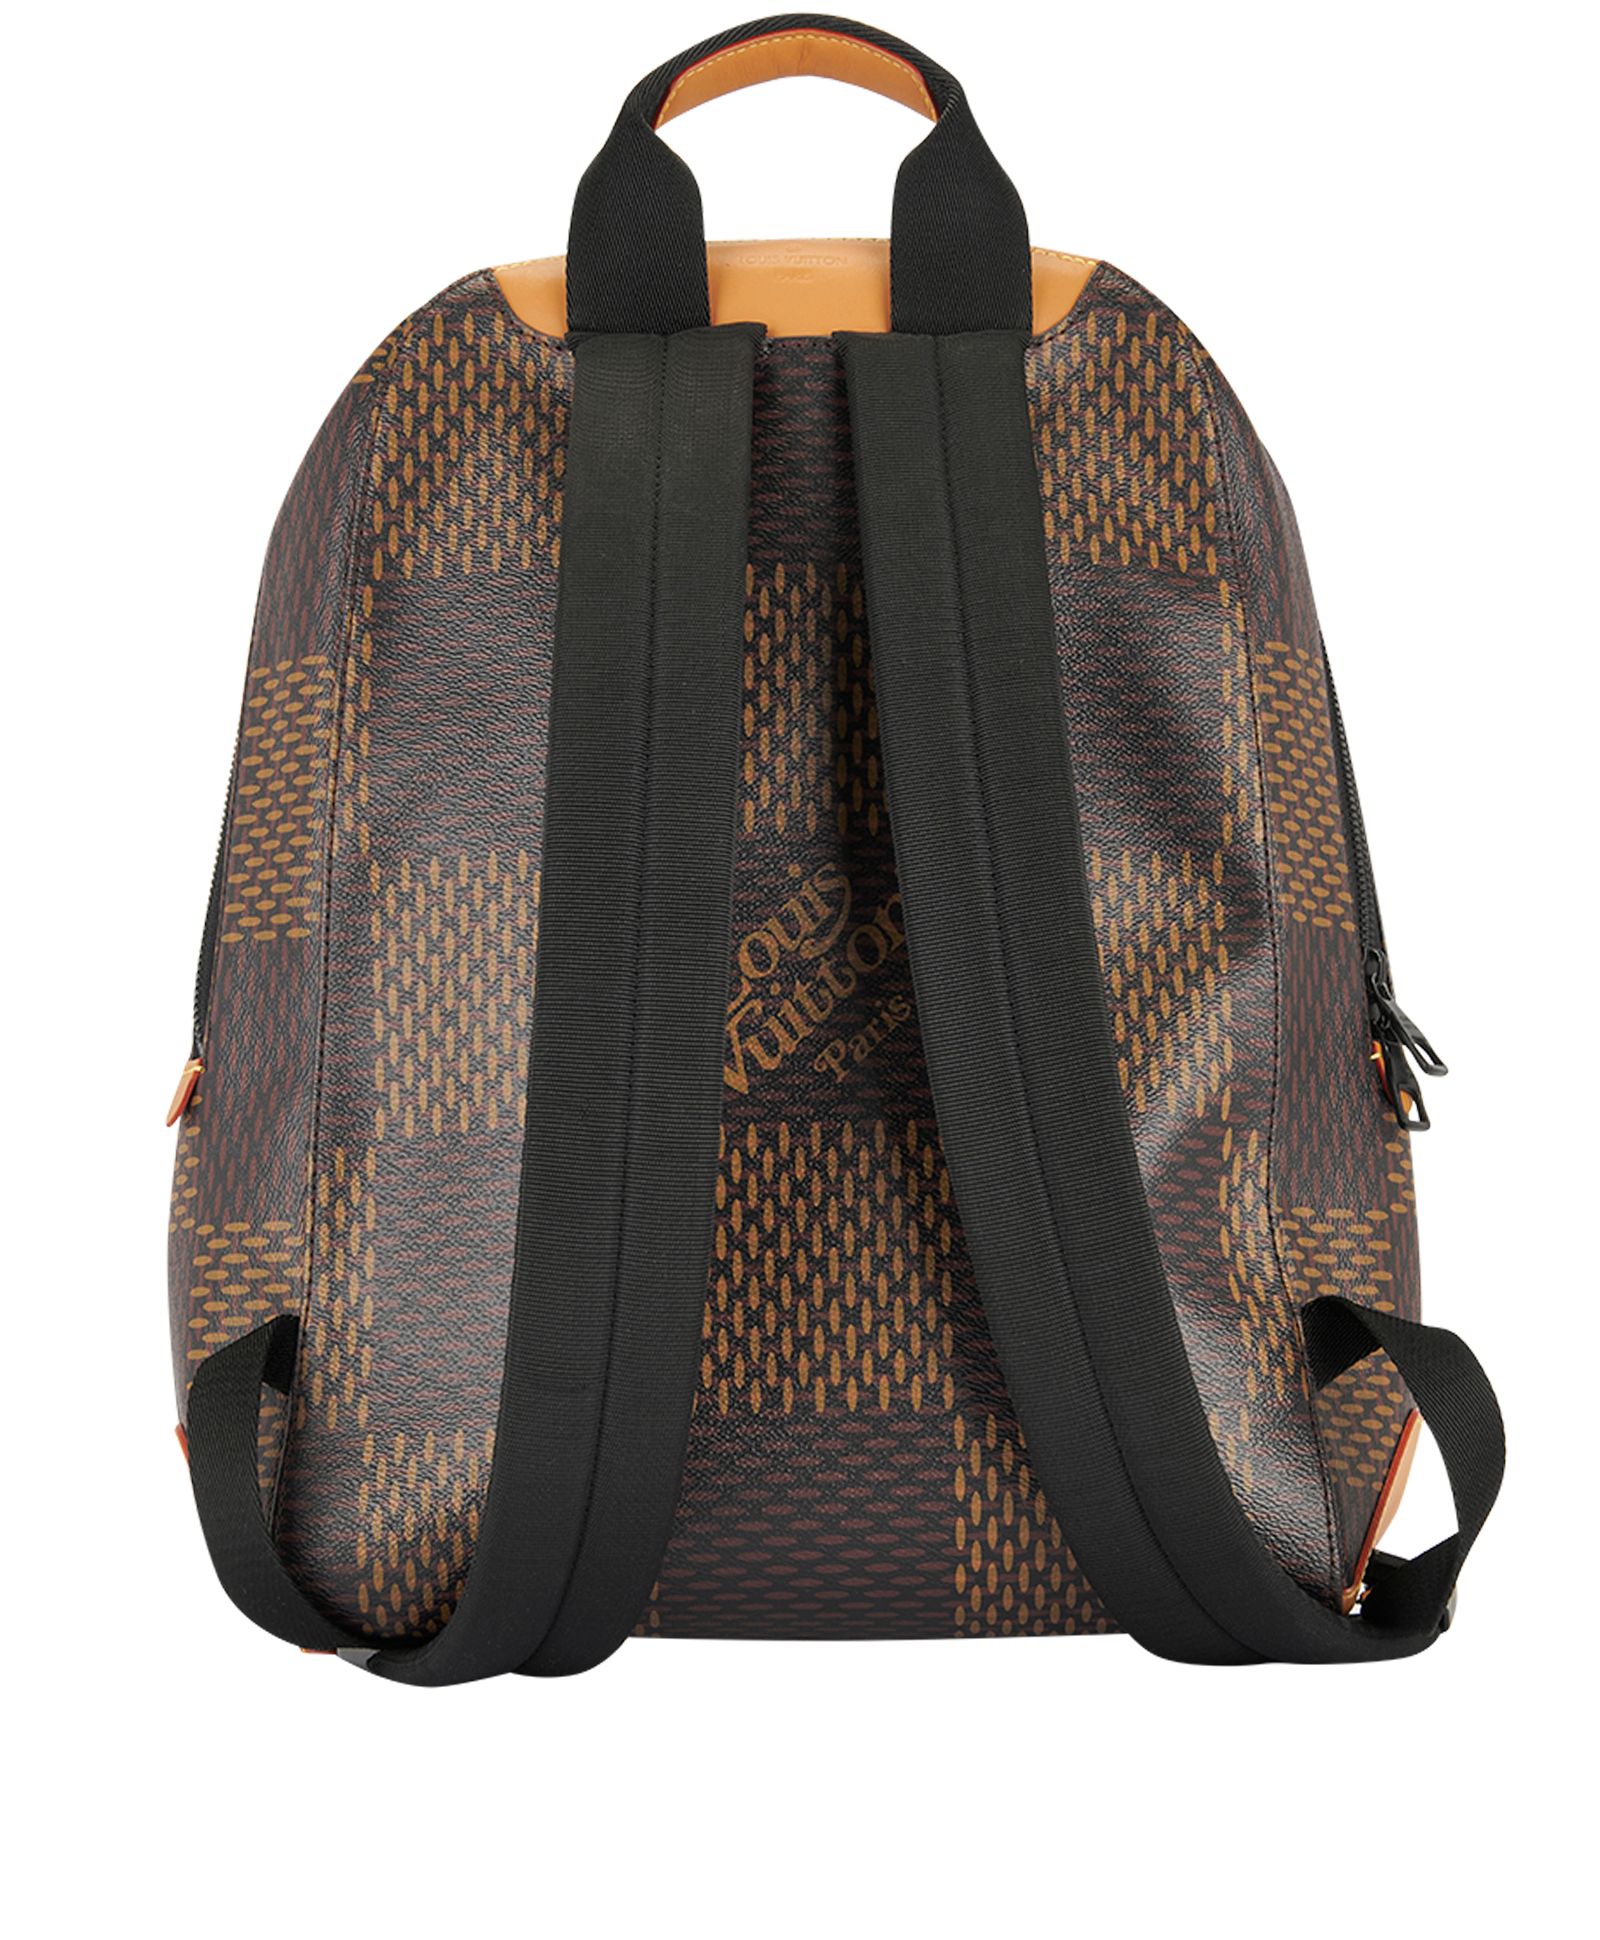 Louis Vuitton Campus Backpack